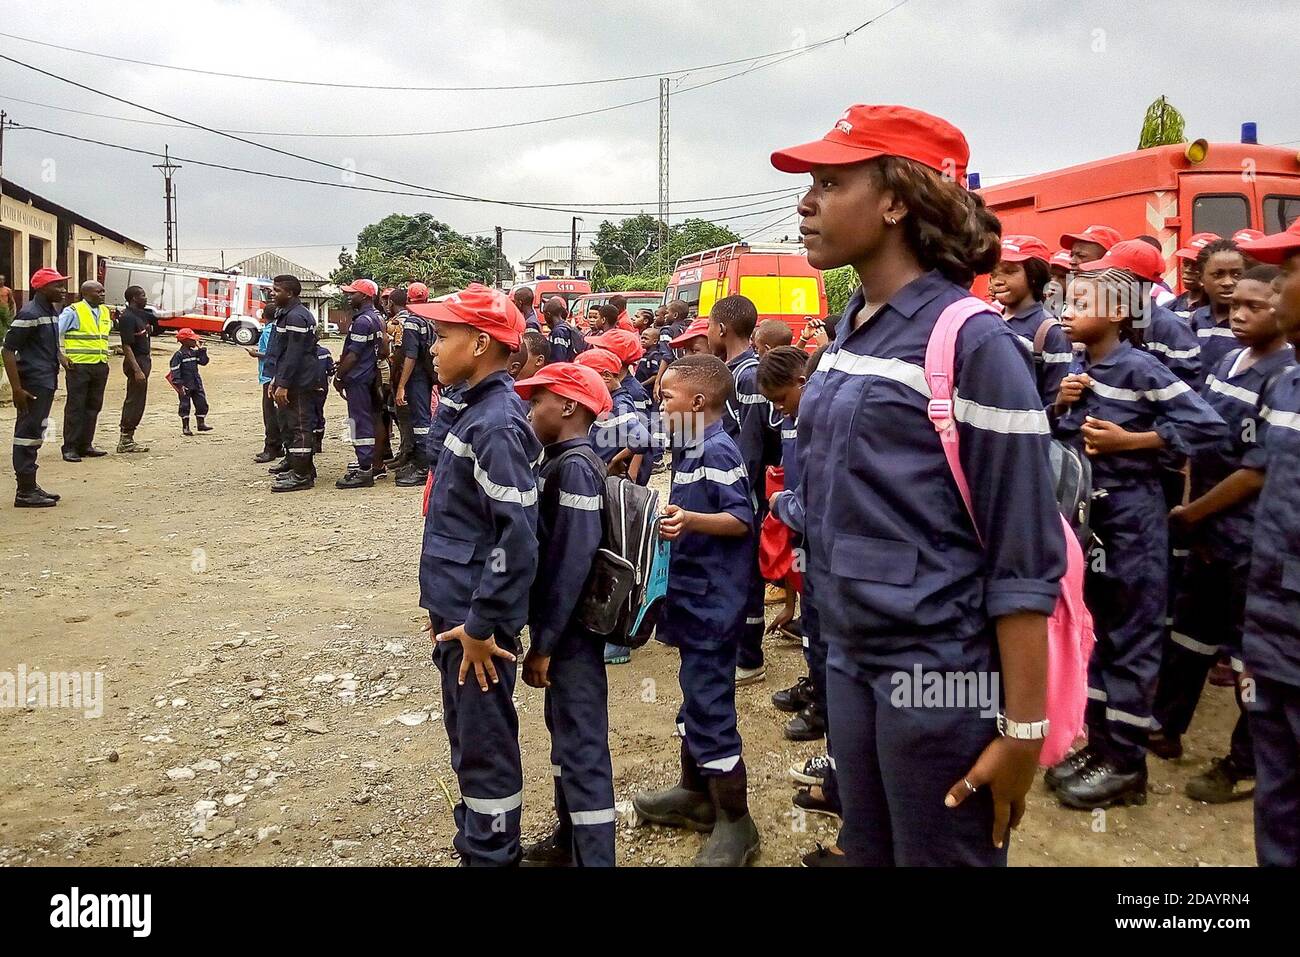 Children attend a firefighting camp organized by the local firefighters in Douala, Cameroon. Stock Photo